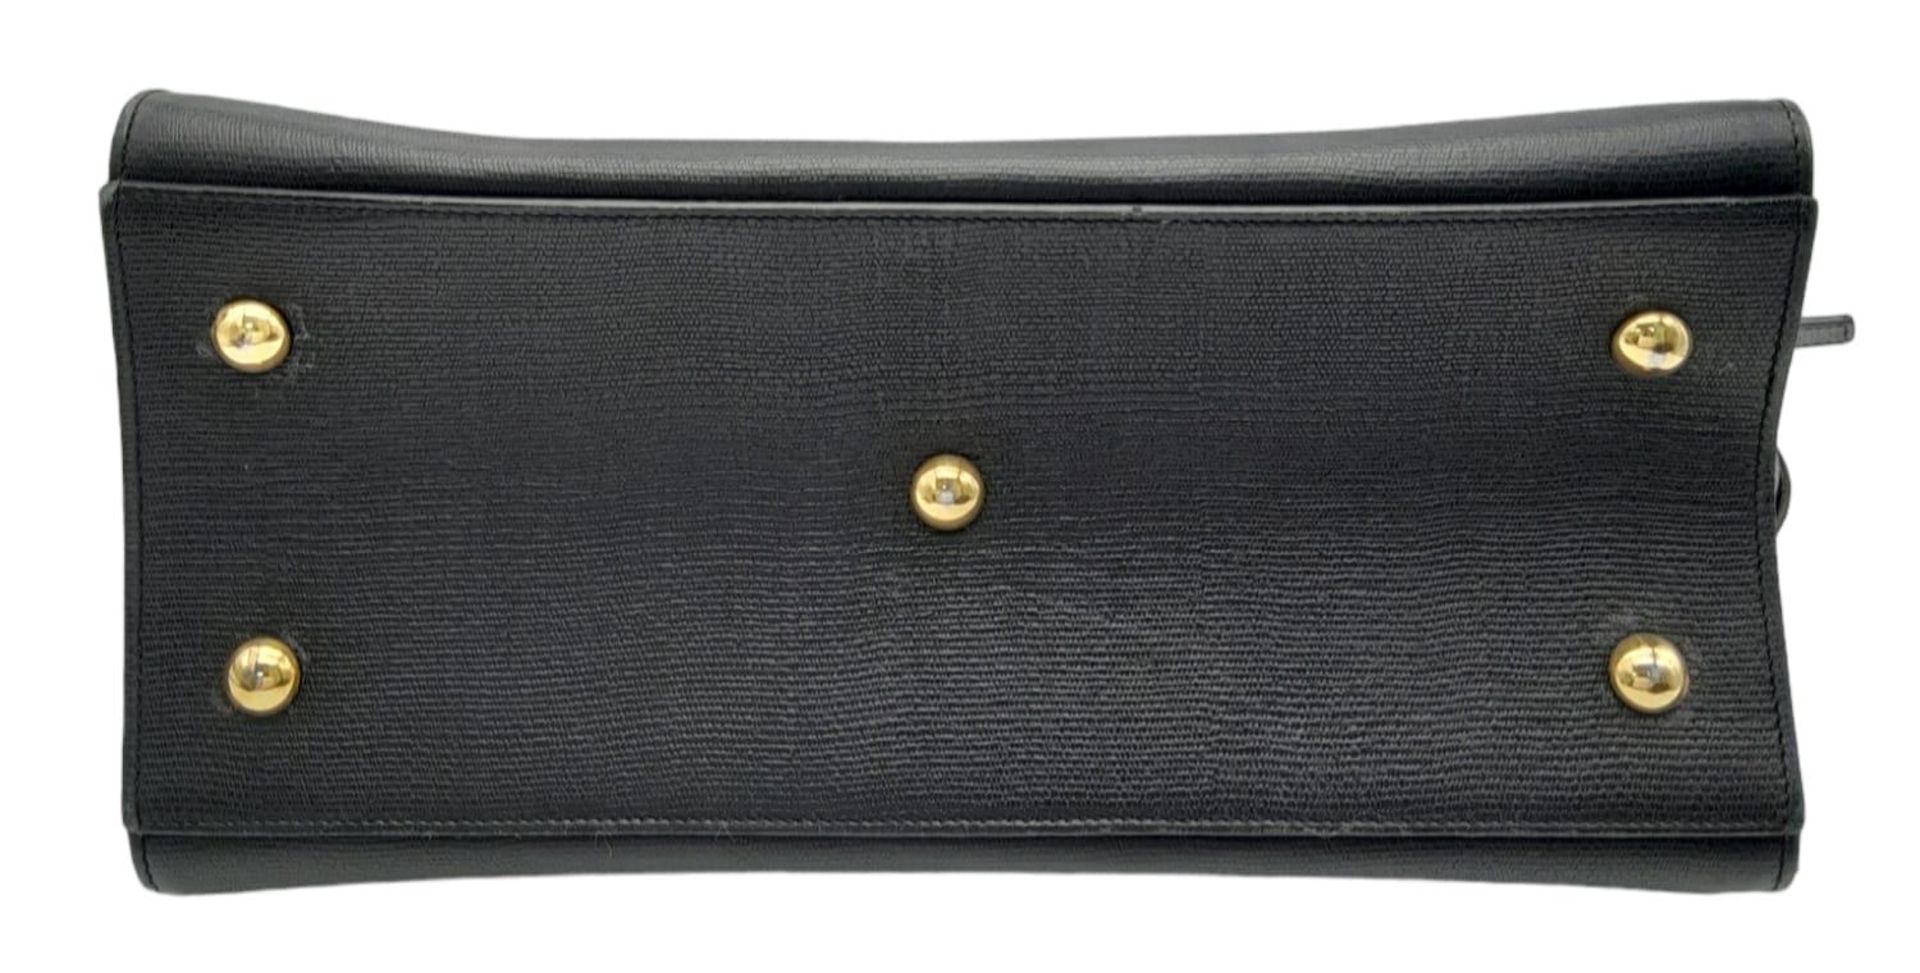 An Yves Saint Laurent Black 'Cabas' Handbag. Leather exterior with gold-toned hardware, two rolled - Bild 5 aus 8